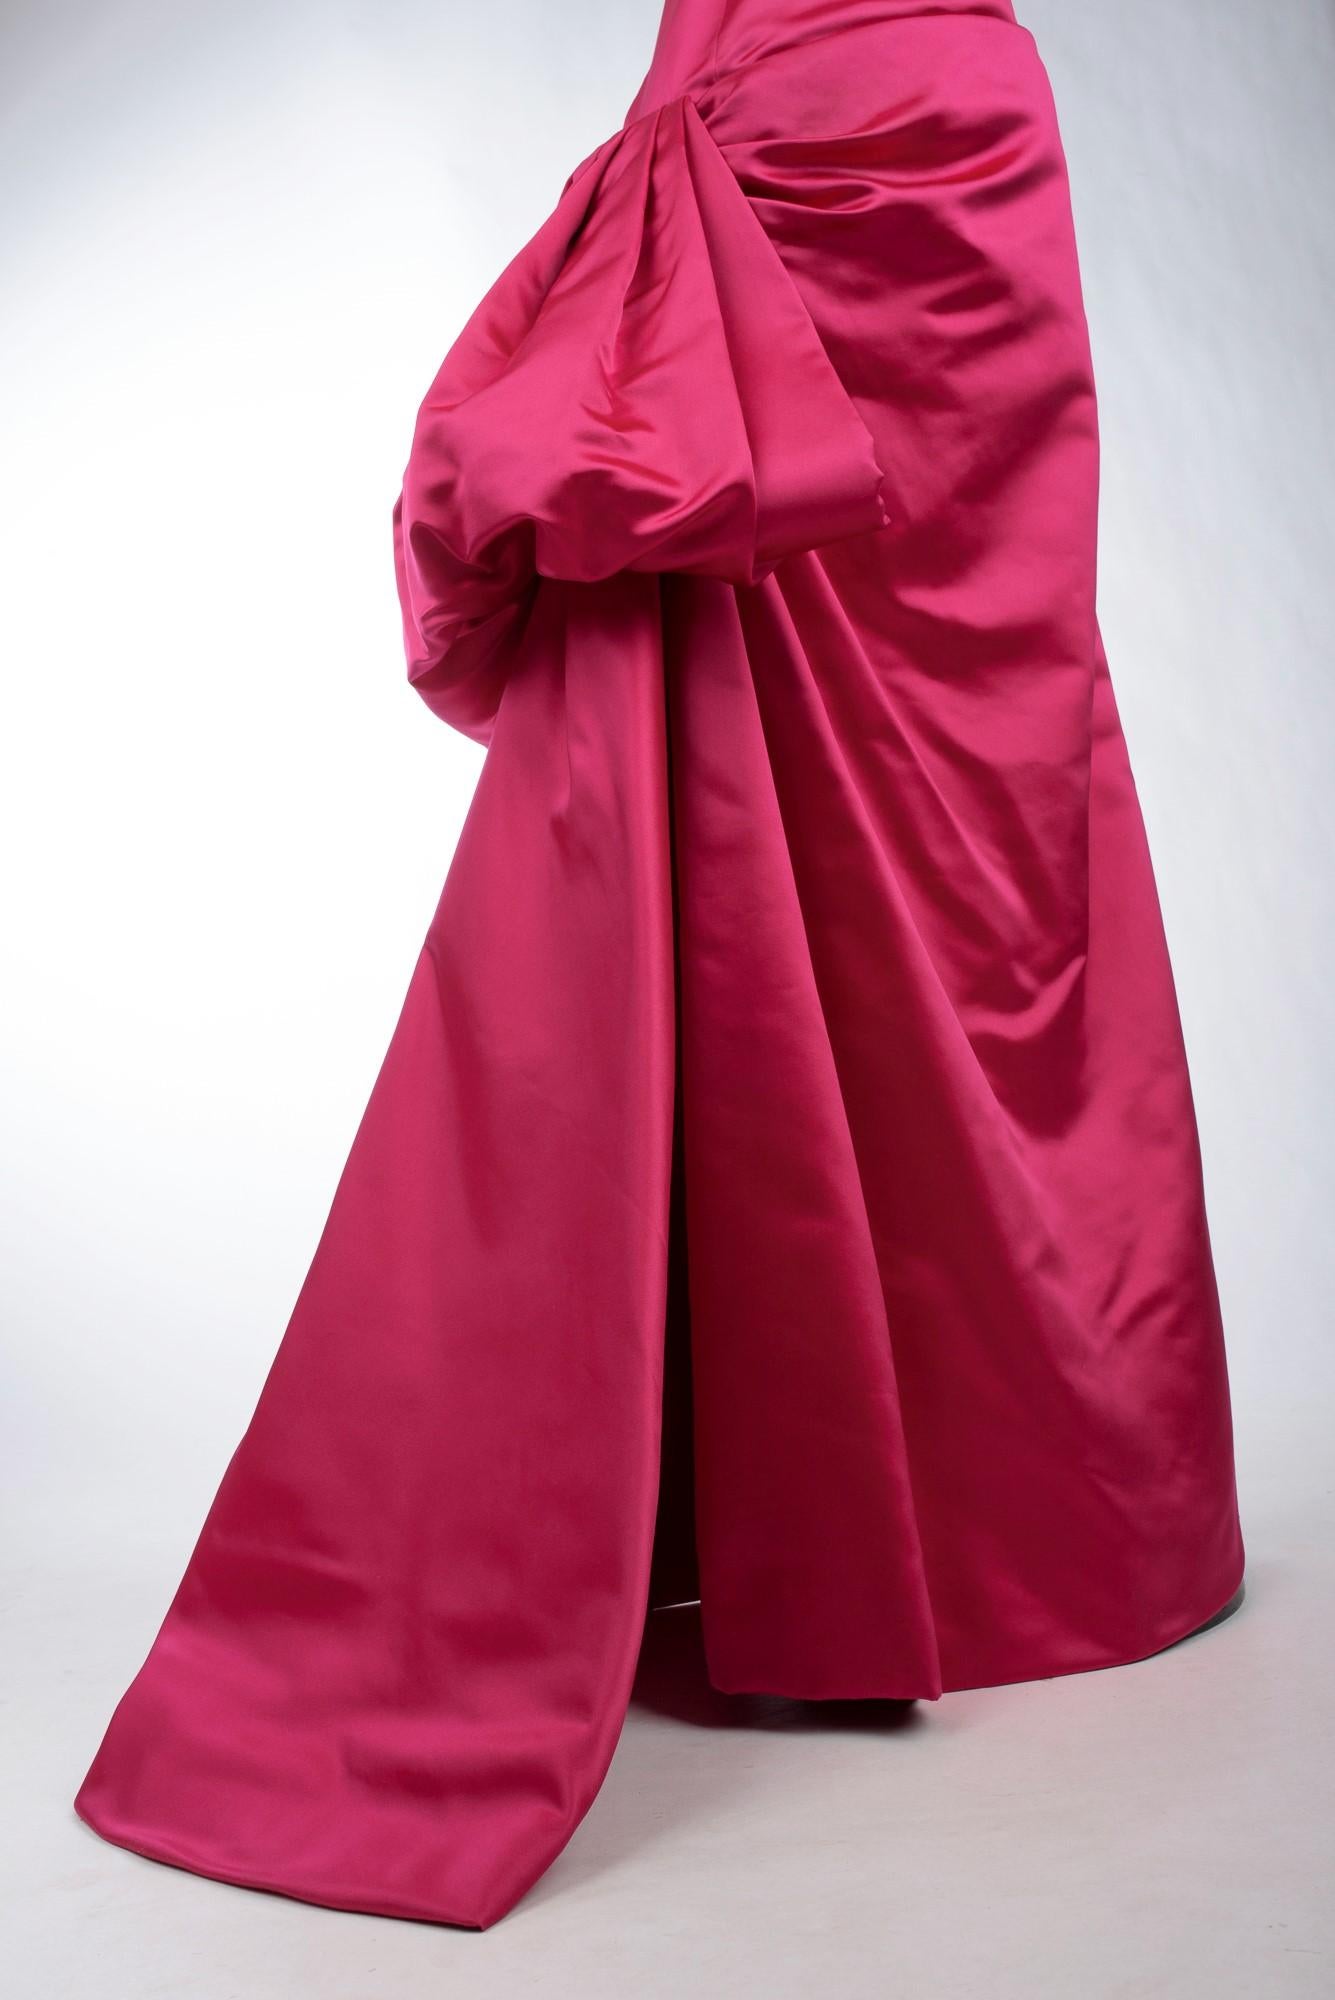 A Christian Dior Haute Couture Evening Dress Numbered 218551 Circa 1959-1965 For Sale 6